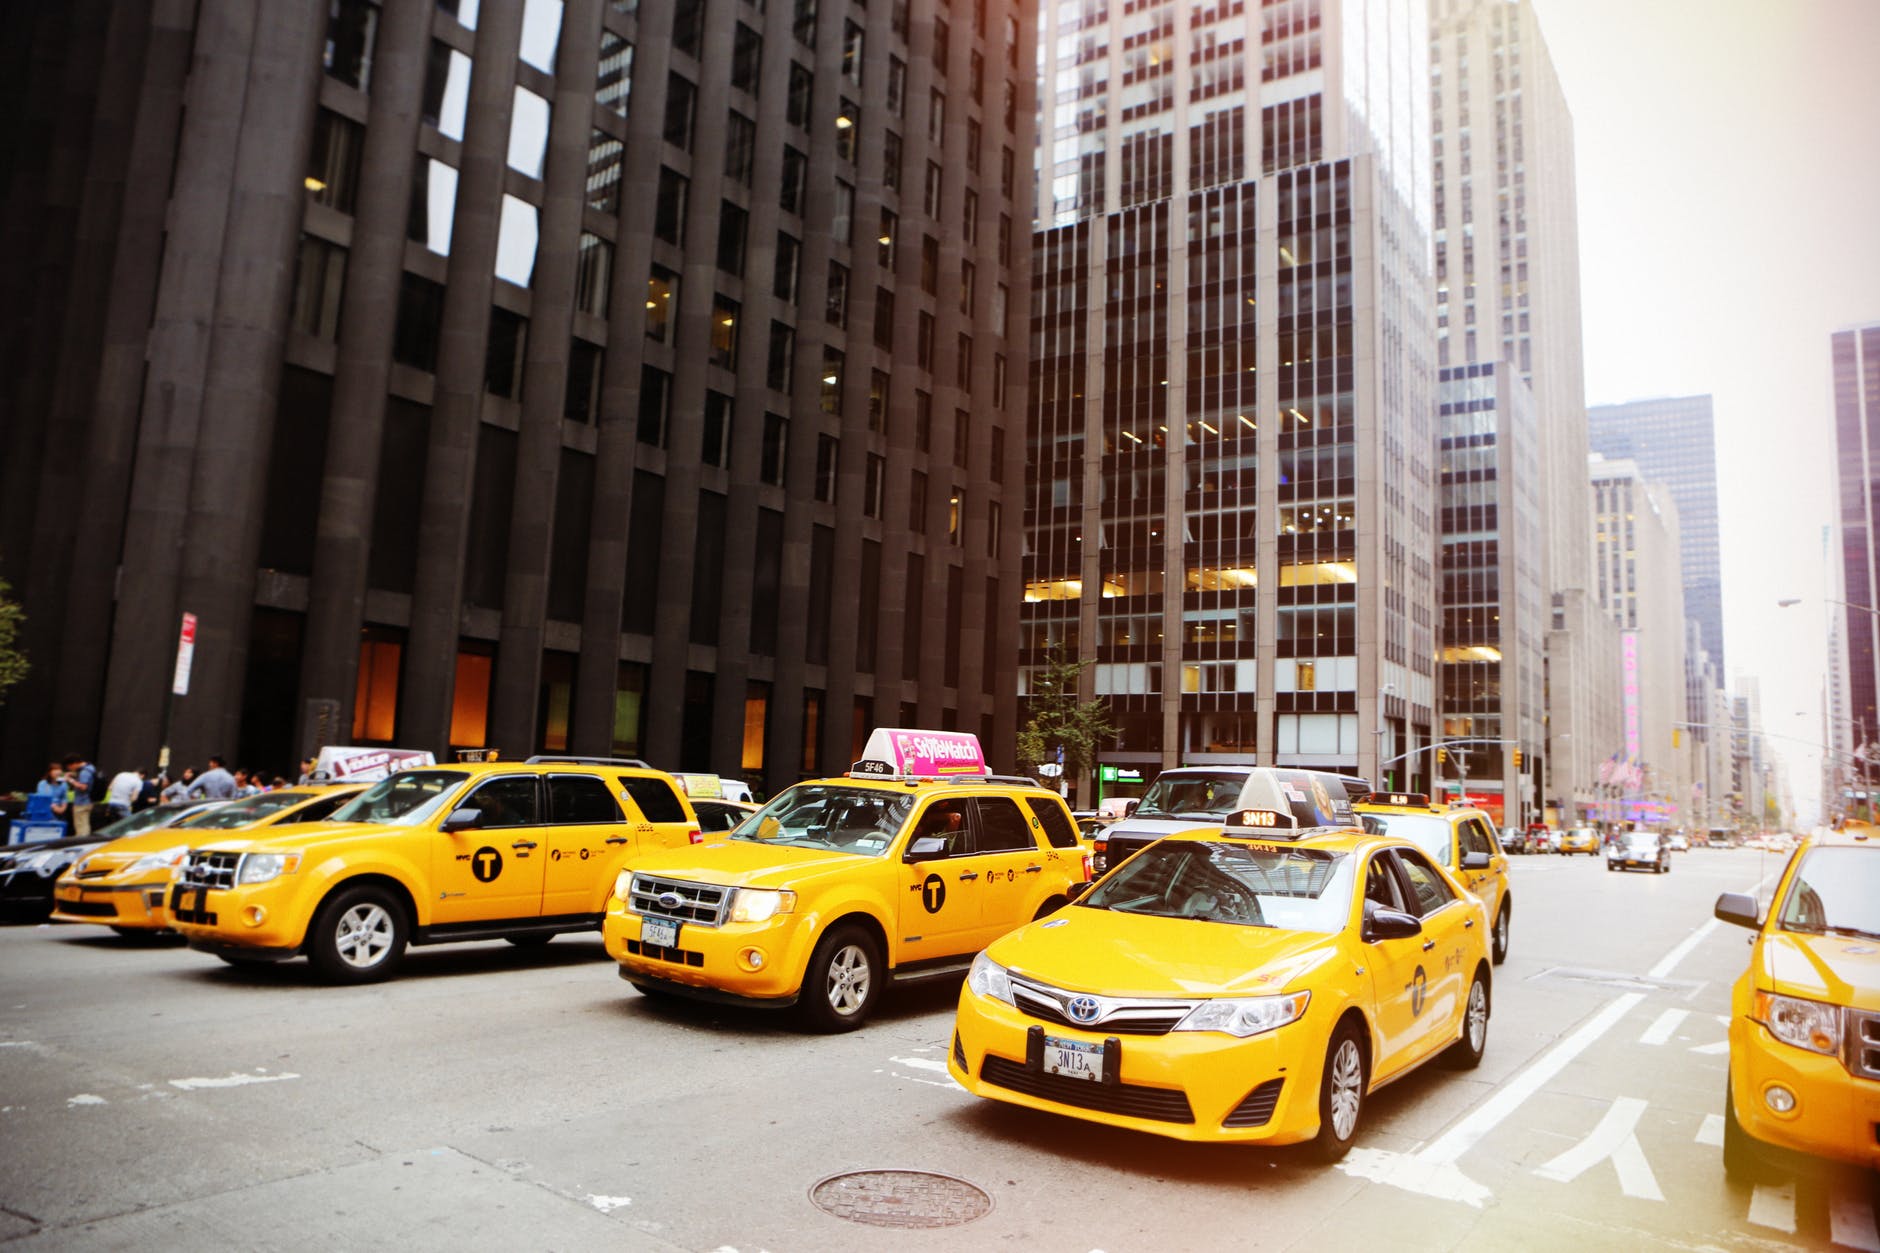 Why Choose a Cab for Your Ride to the Airport?